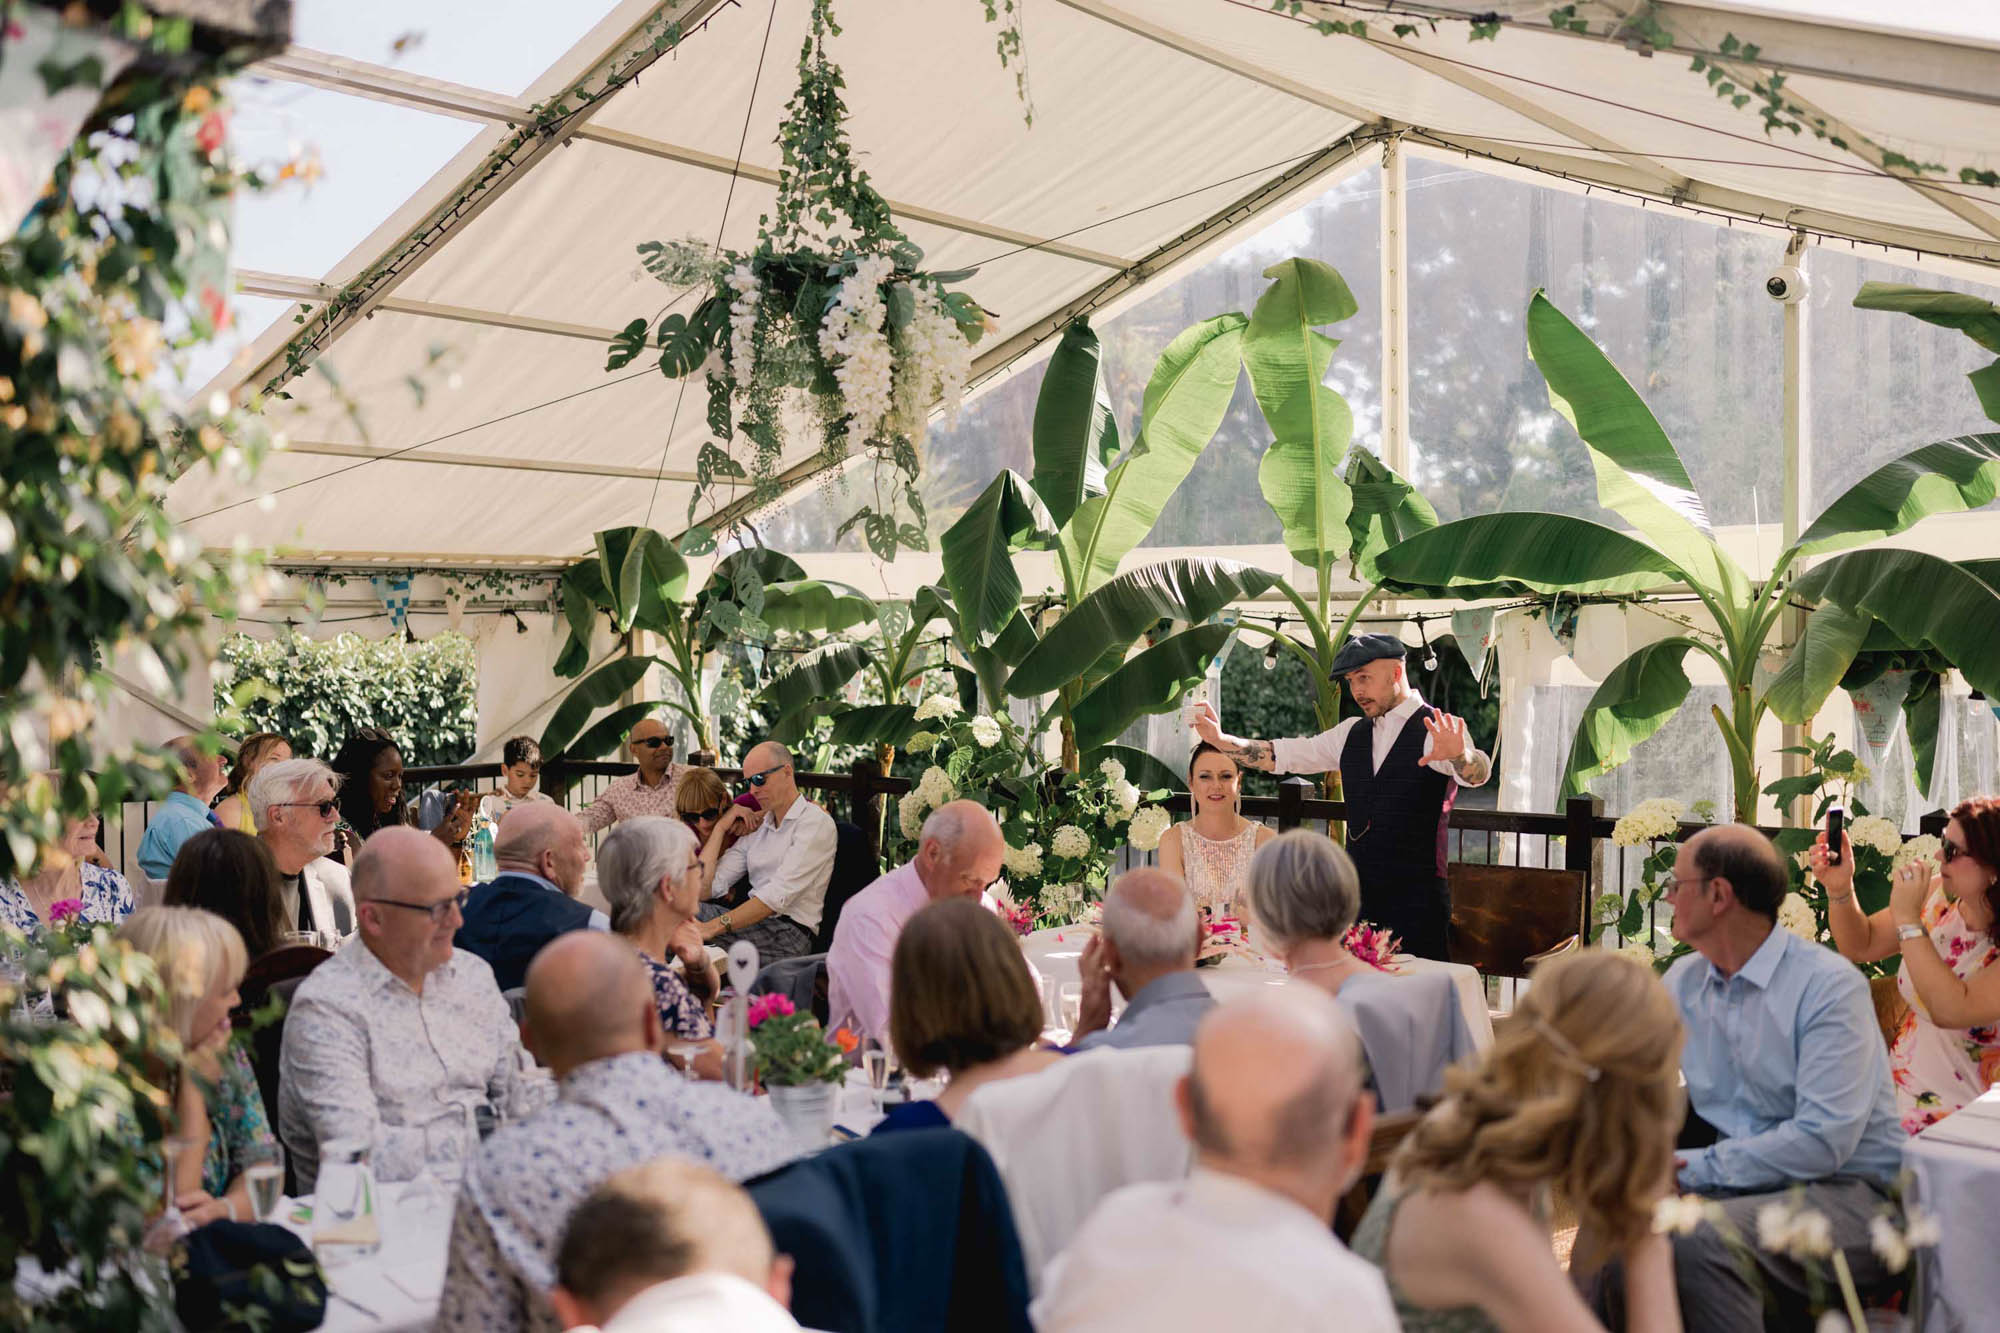 Groom's speech at a wedding at Palm Court Pavilion.